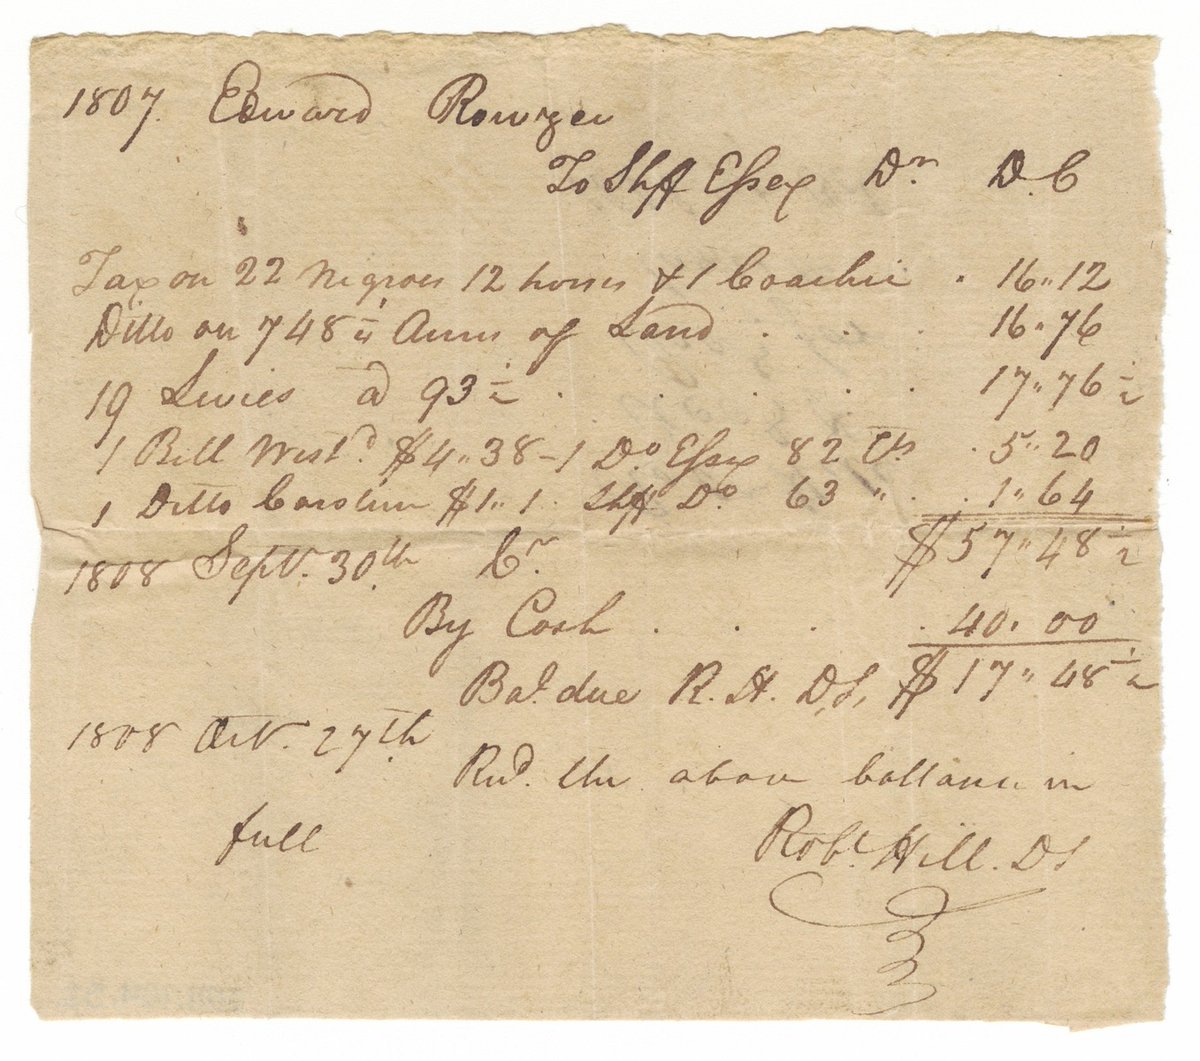 Record of taxes on property, including enslaved persons, owned by Edward Rouzee nmaahc.si.edu/object/nmaahc_…